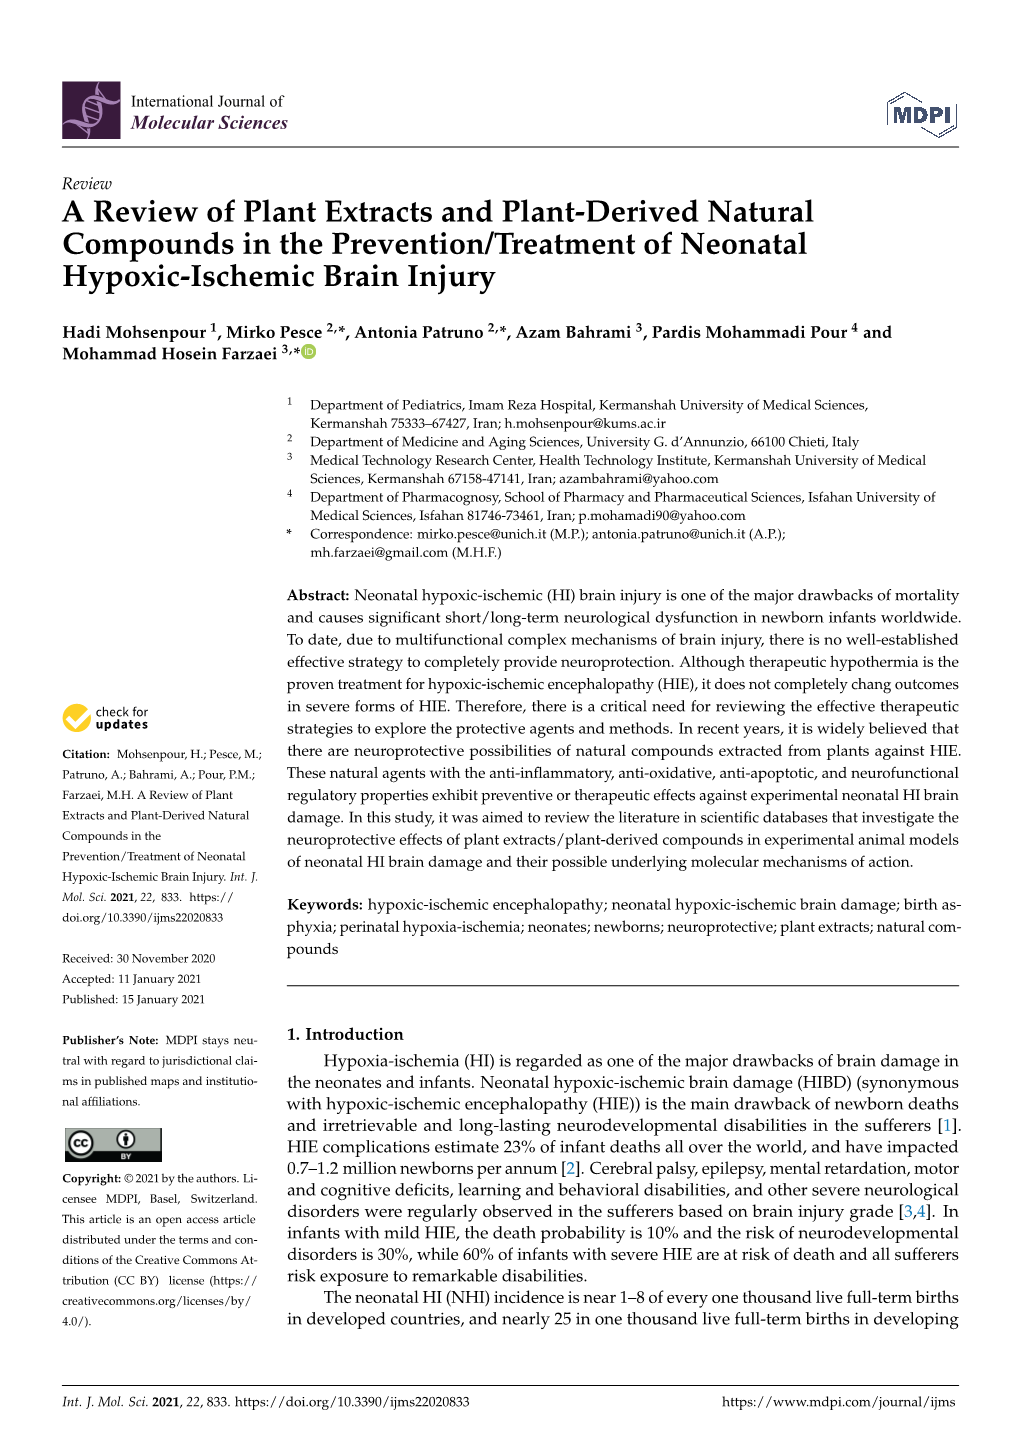 A Review of Plant Extracts and Plant-Derived Natural Compounds in the Prevention/Treatment of Neonatal Hypoxic-Ischemic Brain Injury